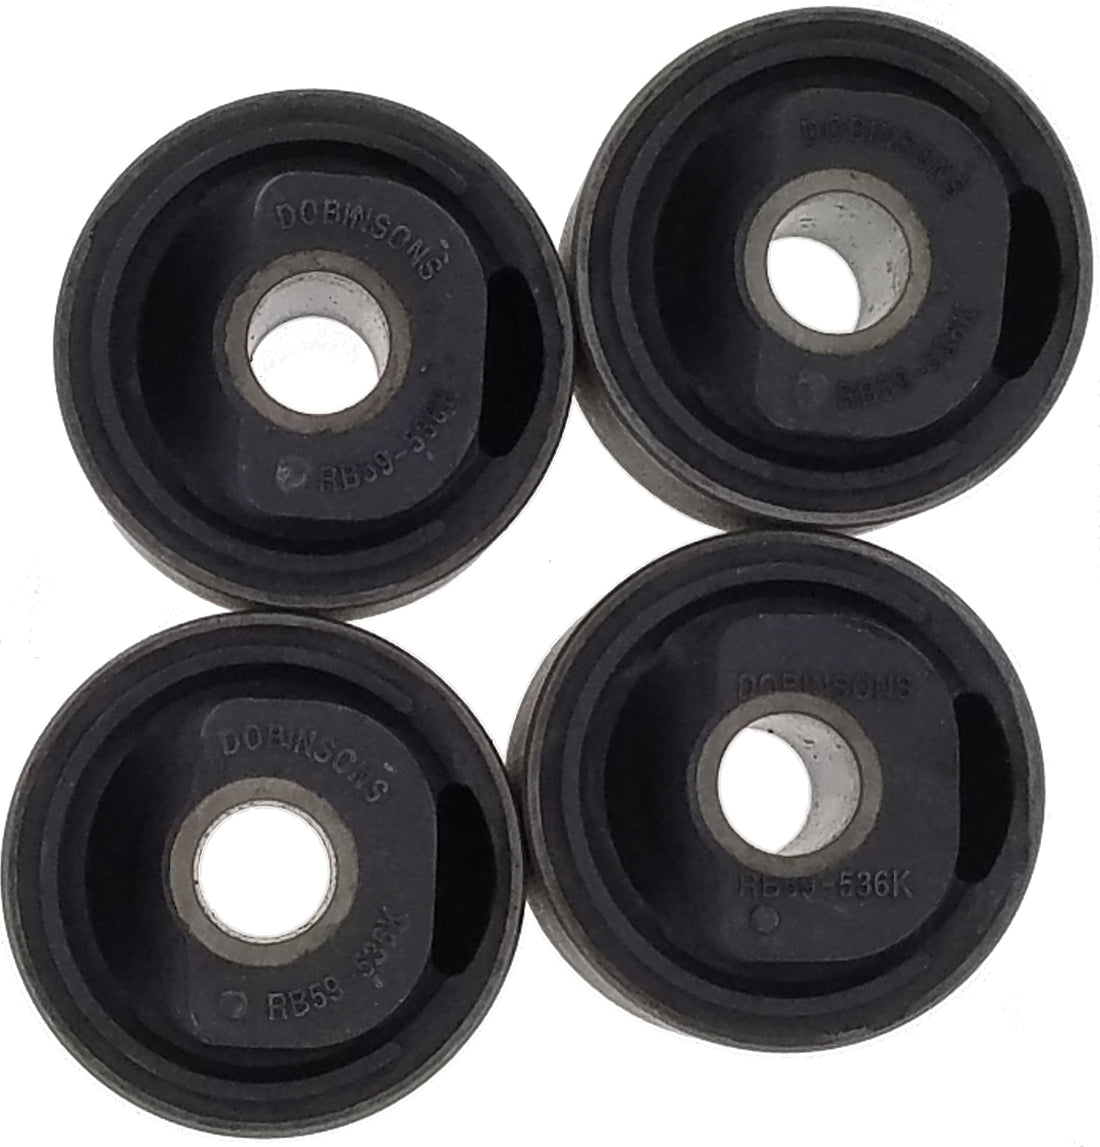 Dobinsons Front Axle-End Radius Arms Bushings Kit, OE Rubber Replacement Land Cruiser 70/80 Series(RB59-536K)